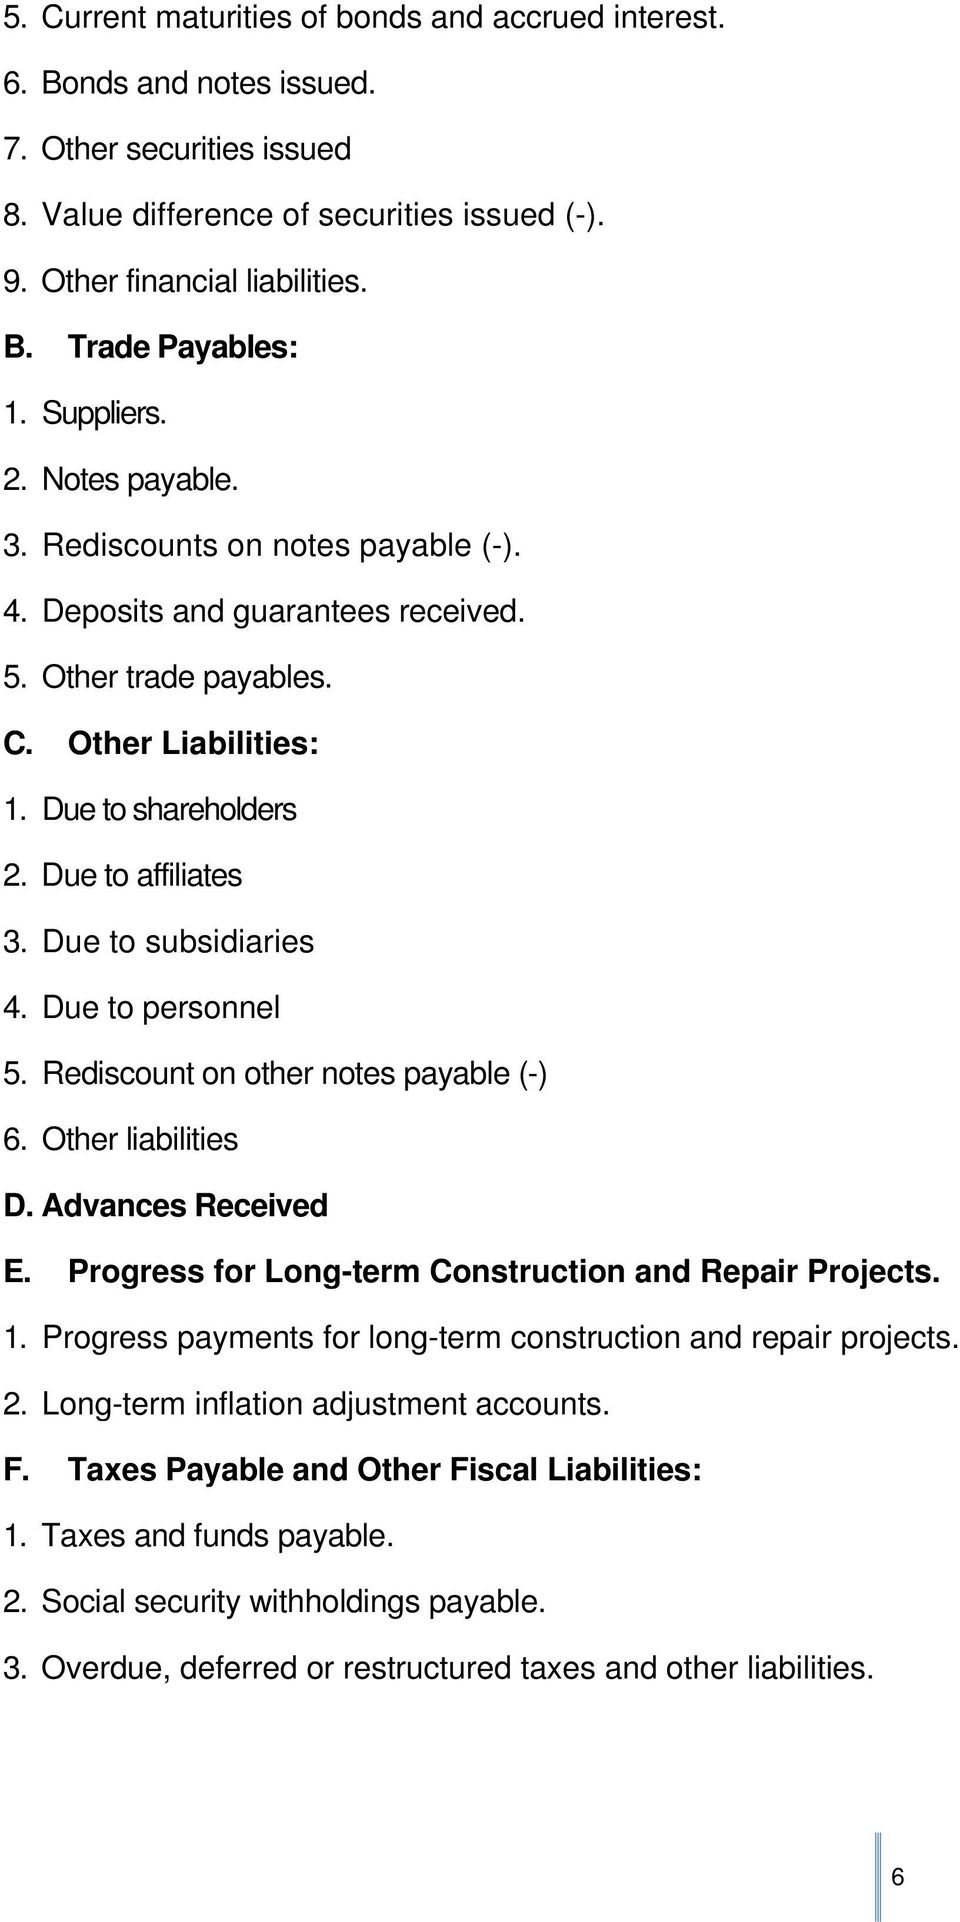 Due to subsidiaries 4. Due to personnel 5. Rediscount on other notes payable (-) 6. Other liabilities D. Advances Received E. Progress for Long-term Construction and Repair Projects. 1.